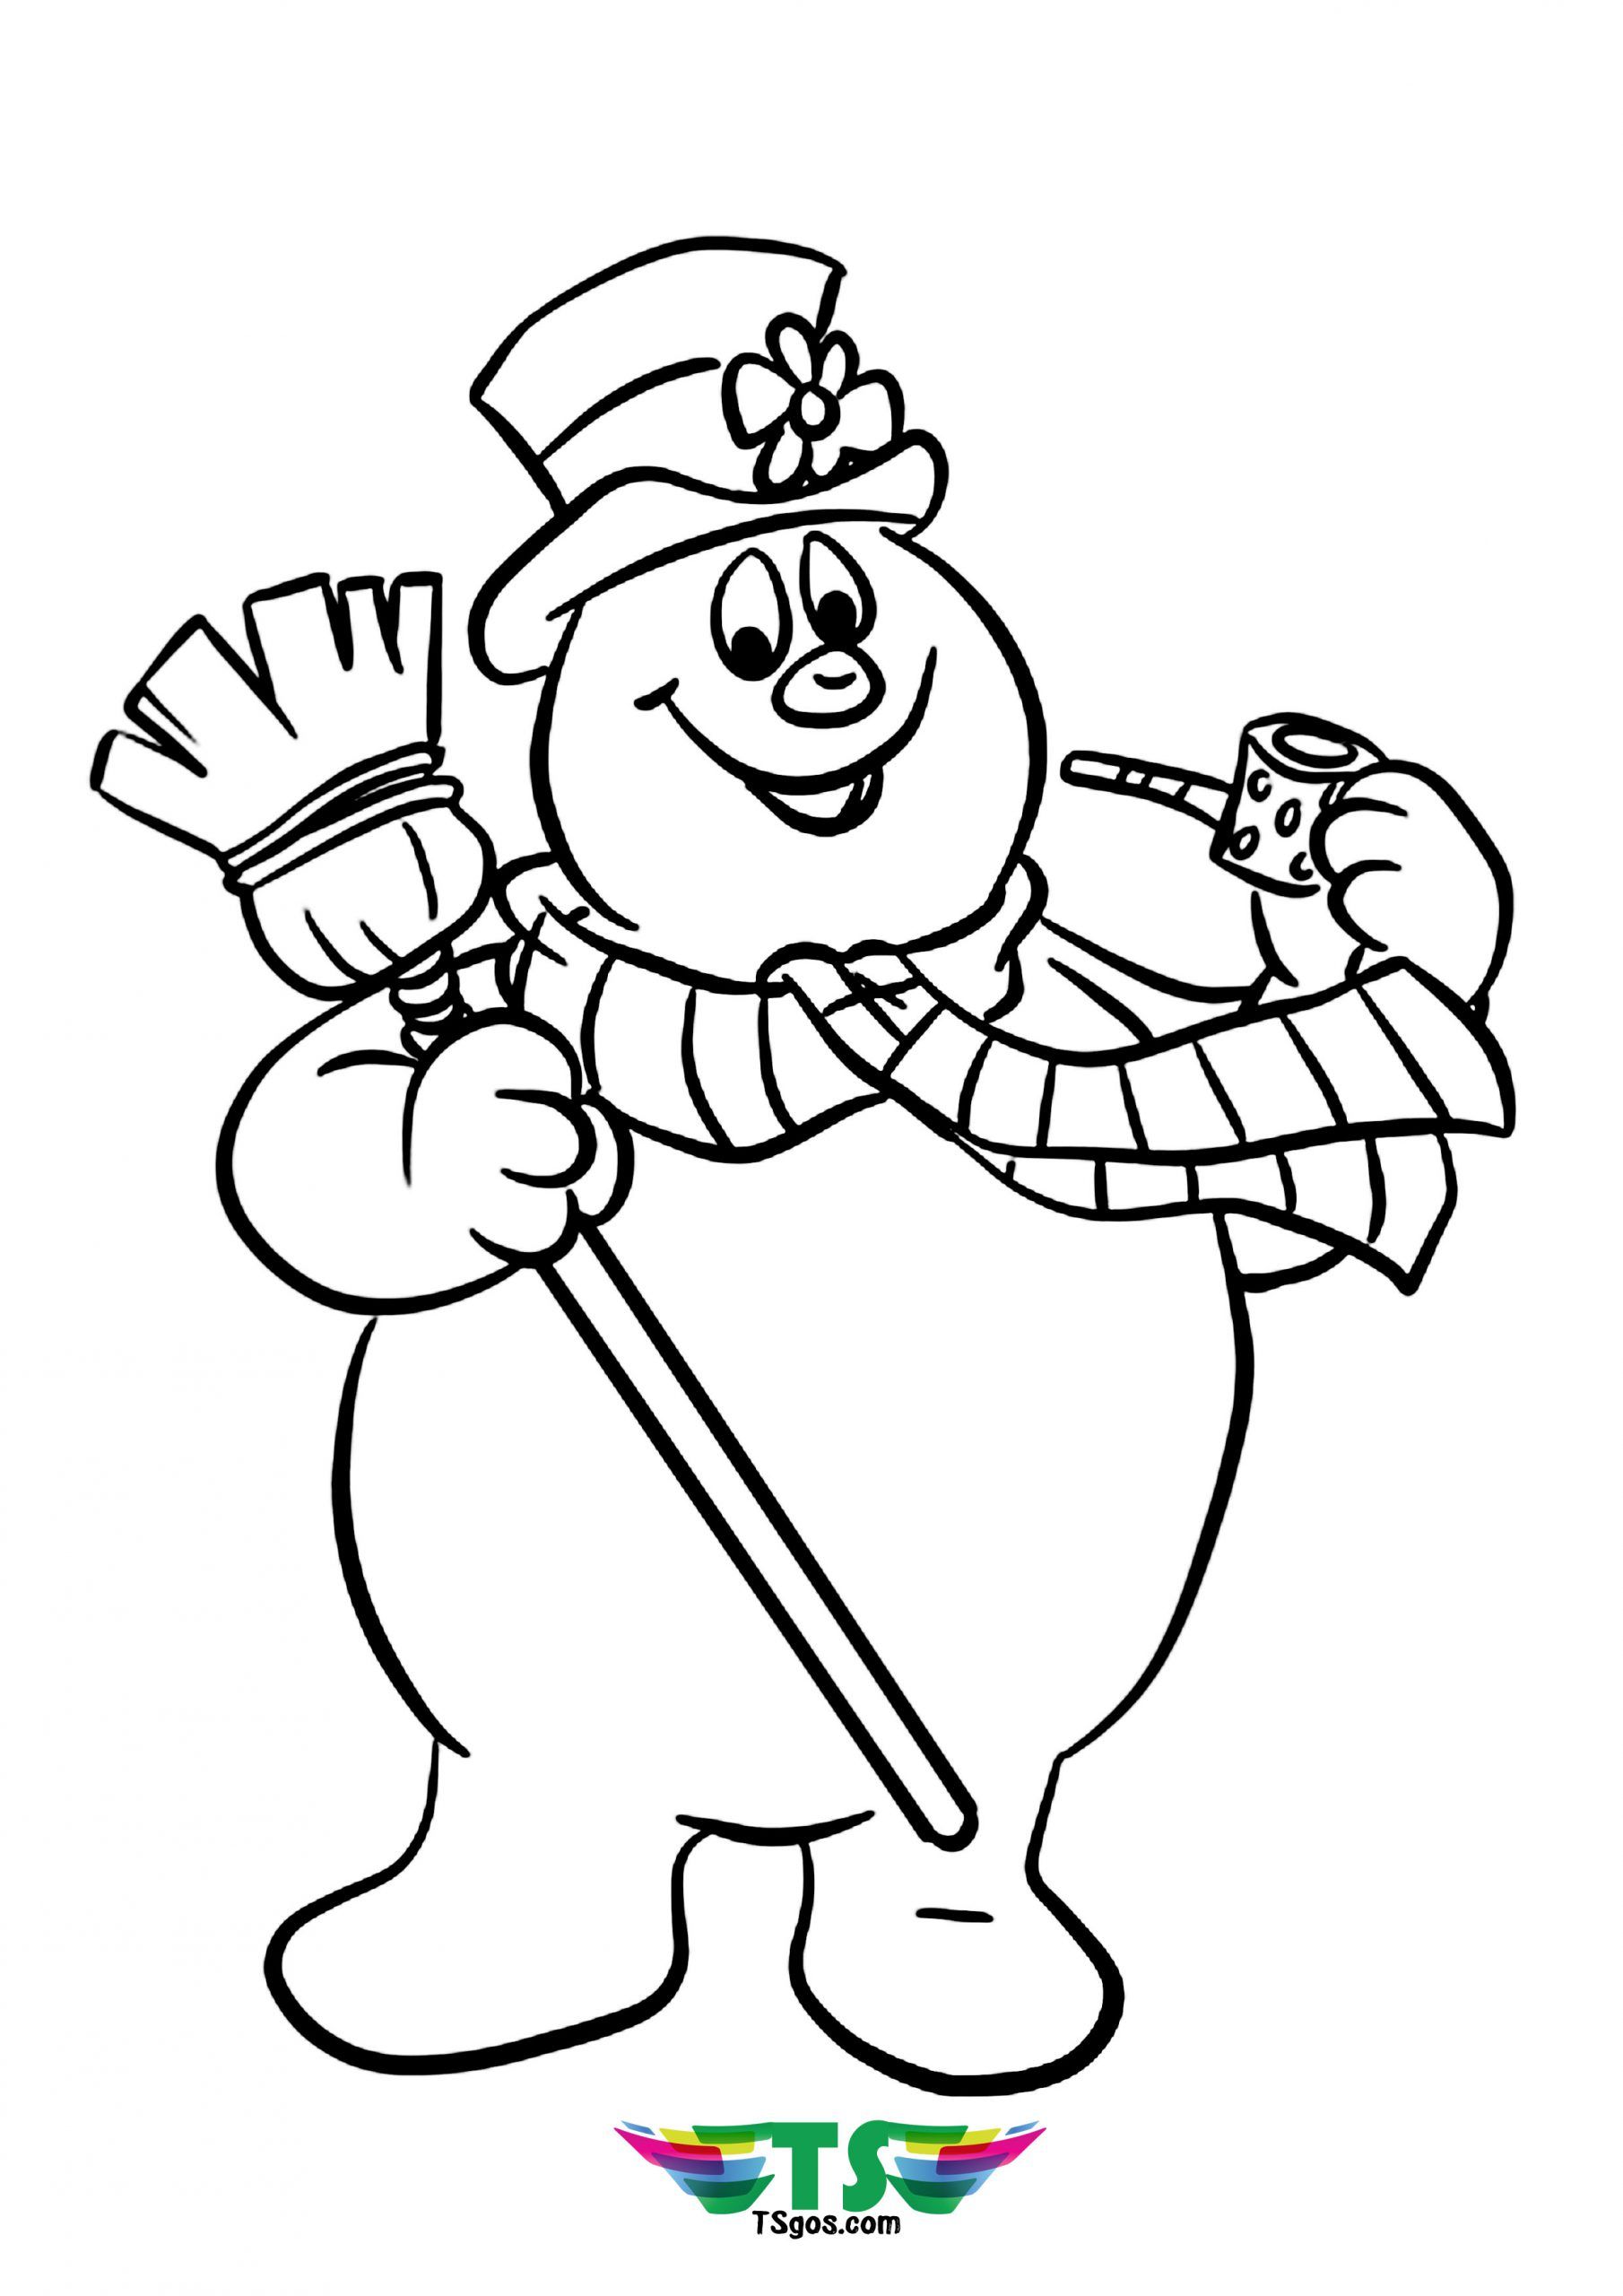 Kids frosty the snowman tsgos coloring page snowman coloring pages christmas coloring pages christmas coloring sheets